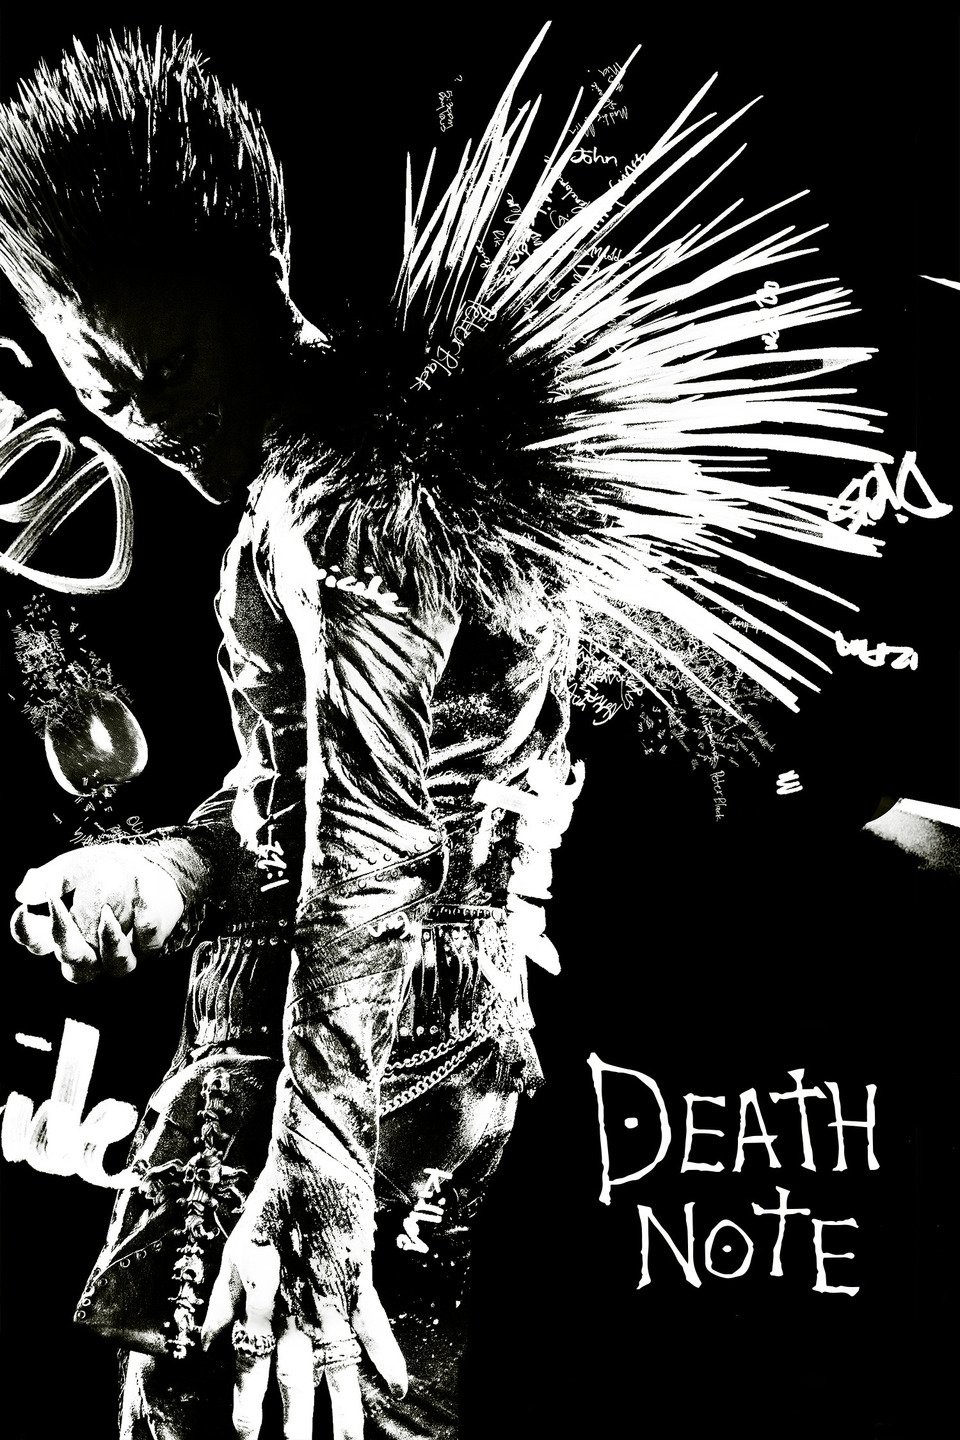 Decided to check out Death Note: L Change the World on IMDB